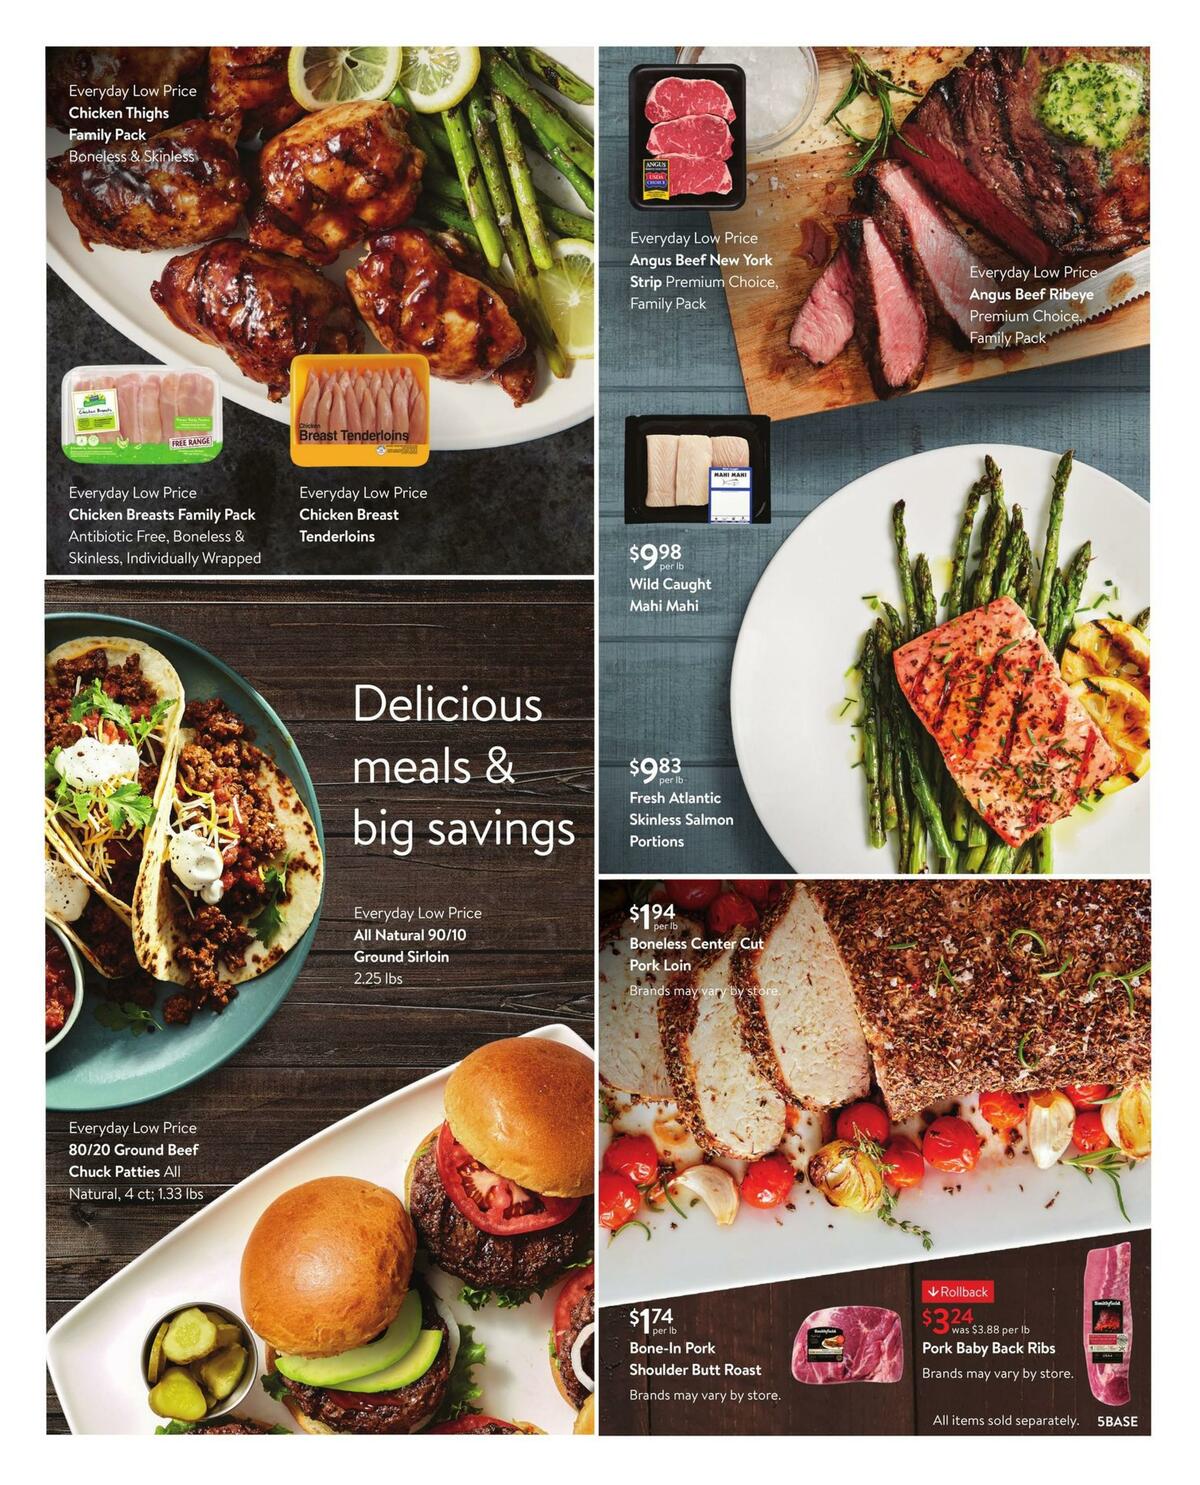 Walmart Weekly Ad from March 31